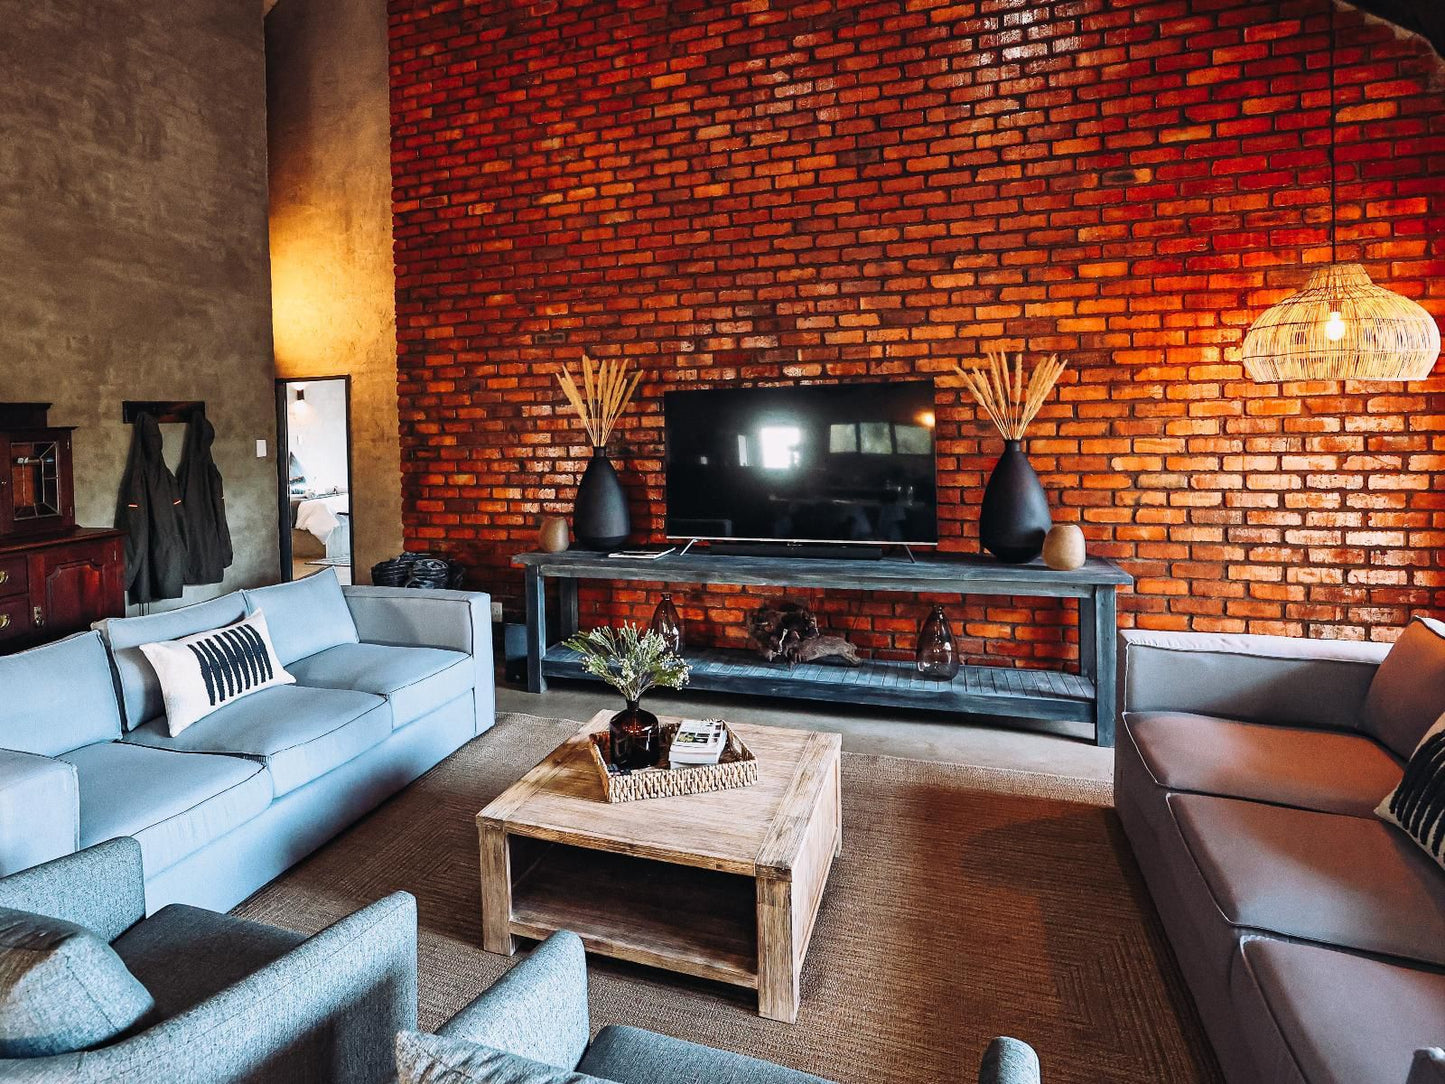 Rhino S Rest Luxury Self Catering Home Hoedspruit Limpopo Province South Africa Brick Texture, Texture, Living Room